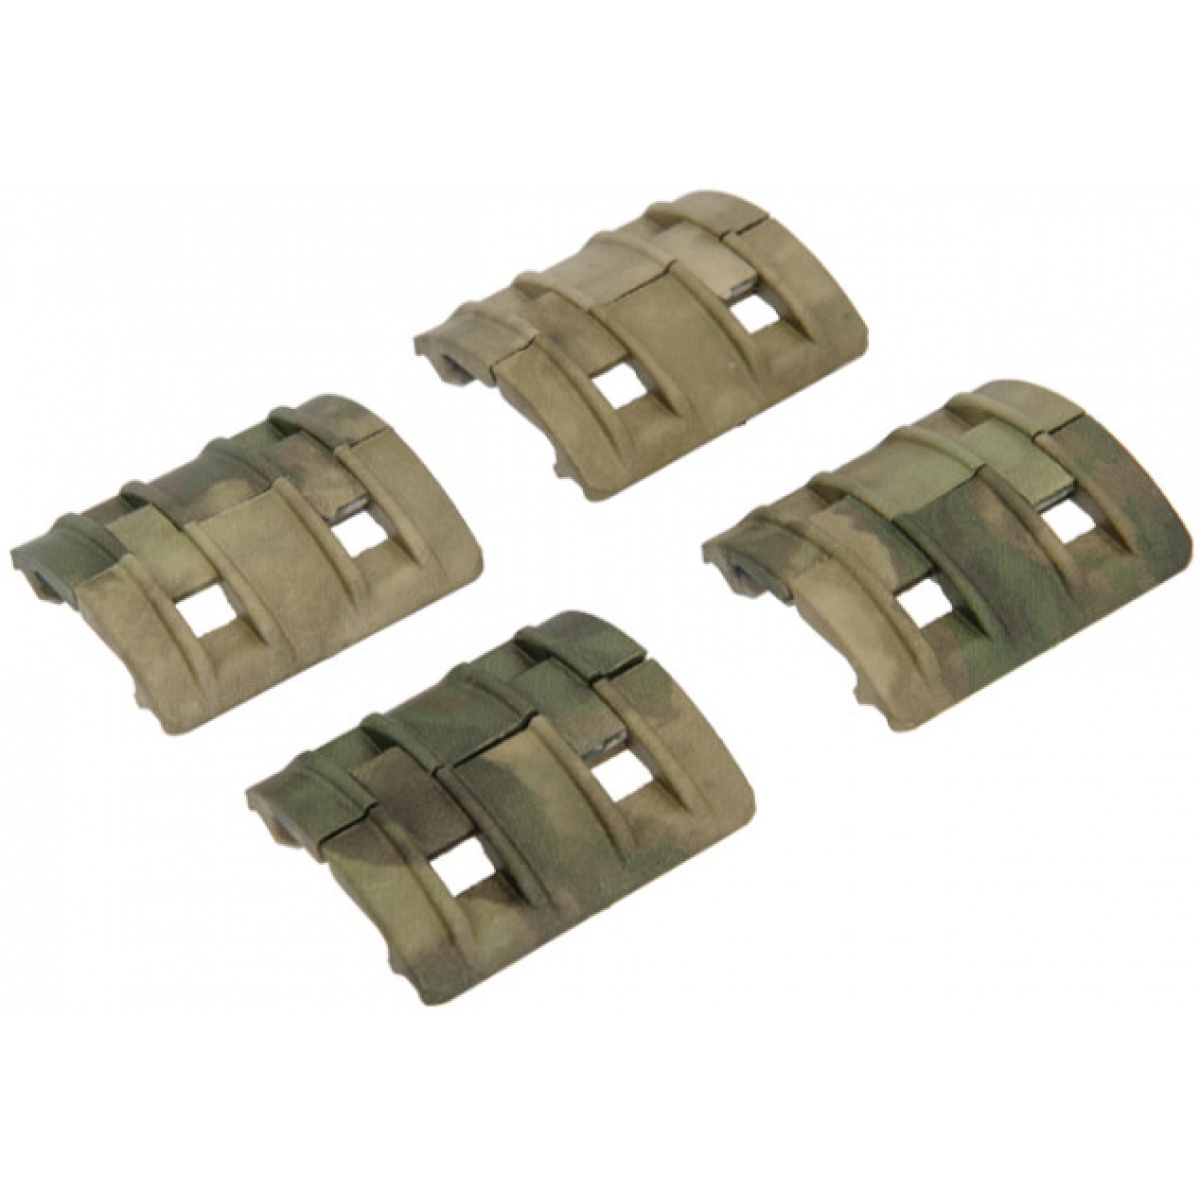 UK Arms Airsoft Tactical 8pc Rail Panel Cover Set - ATFG | Airsoft ...